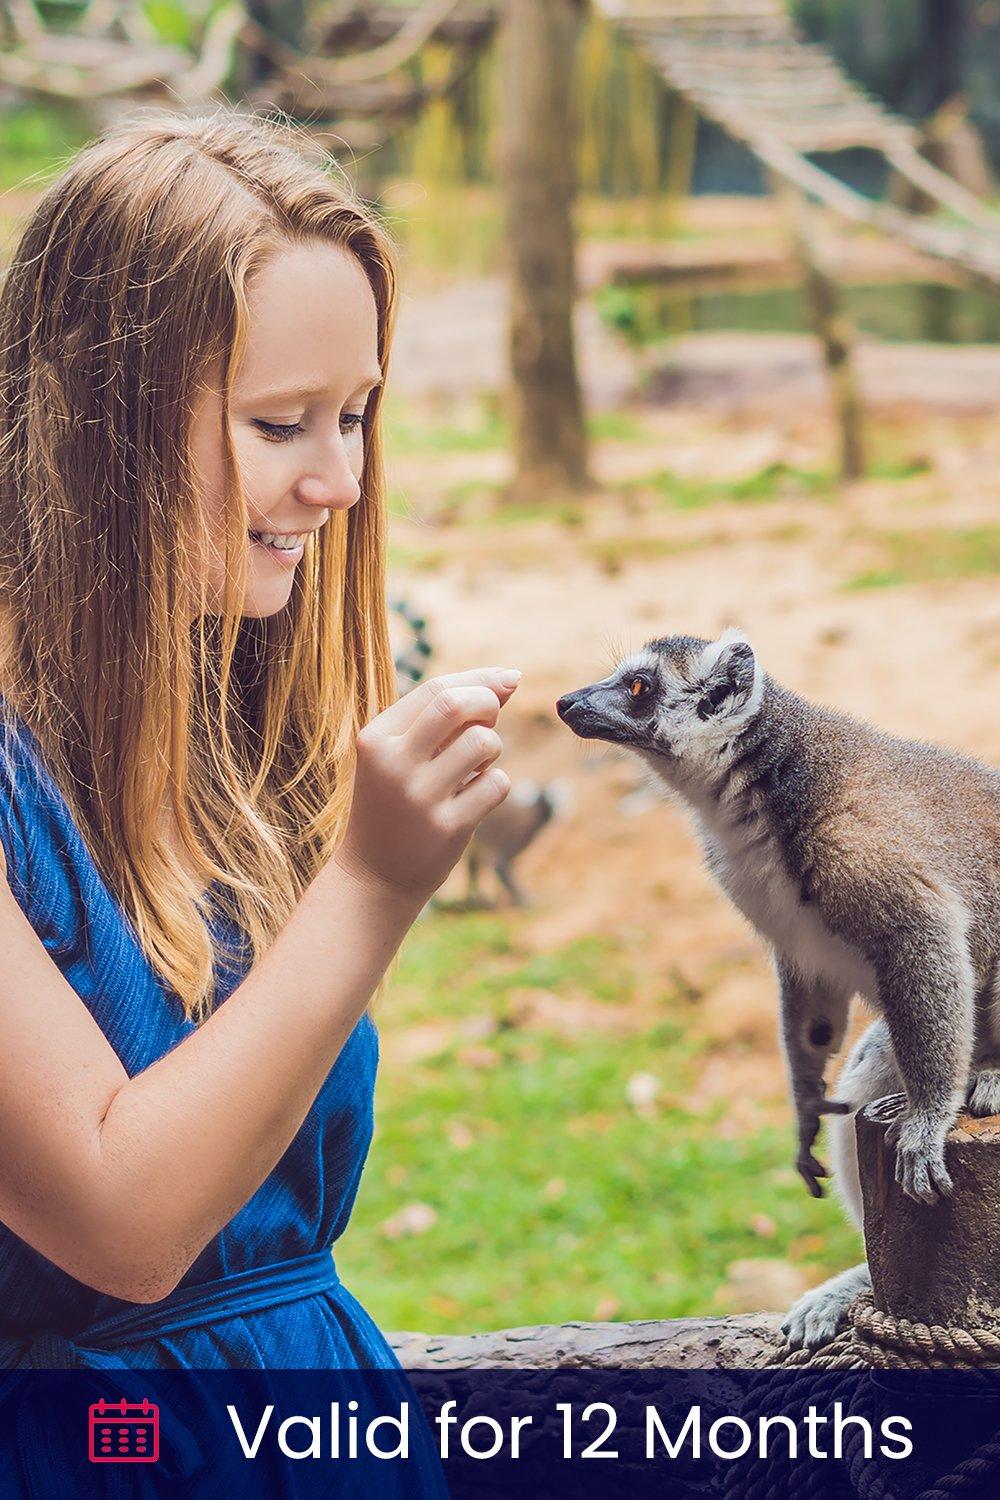 Meet the Meerkats, Servals and Lemurs at Hoo Farm for Two Gift Experience